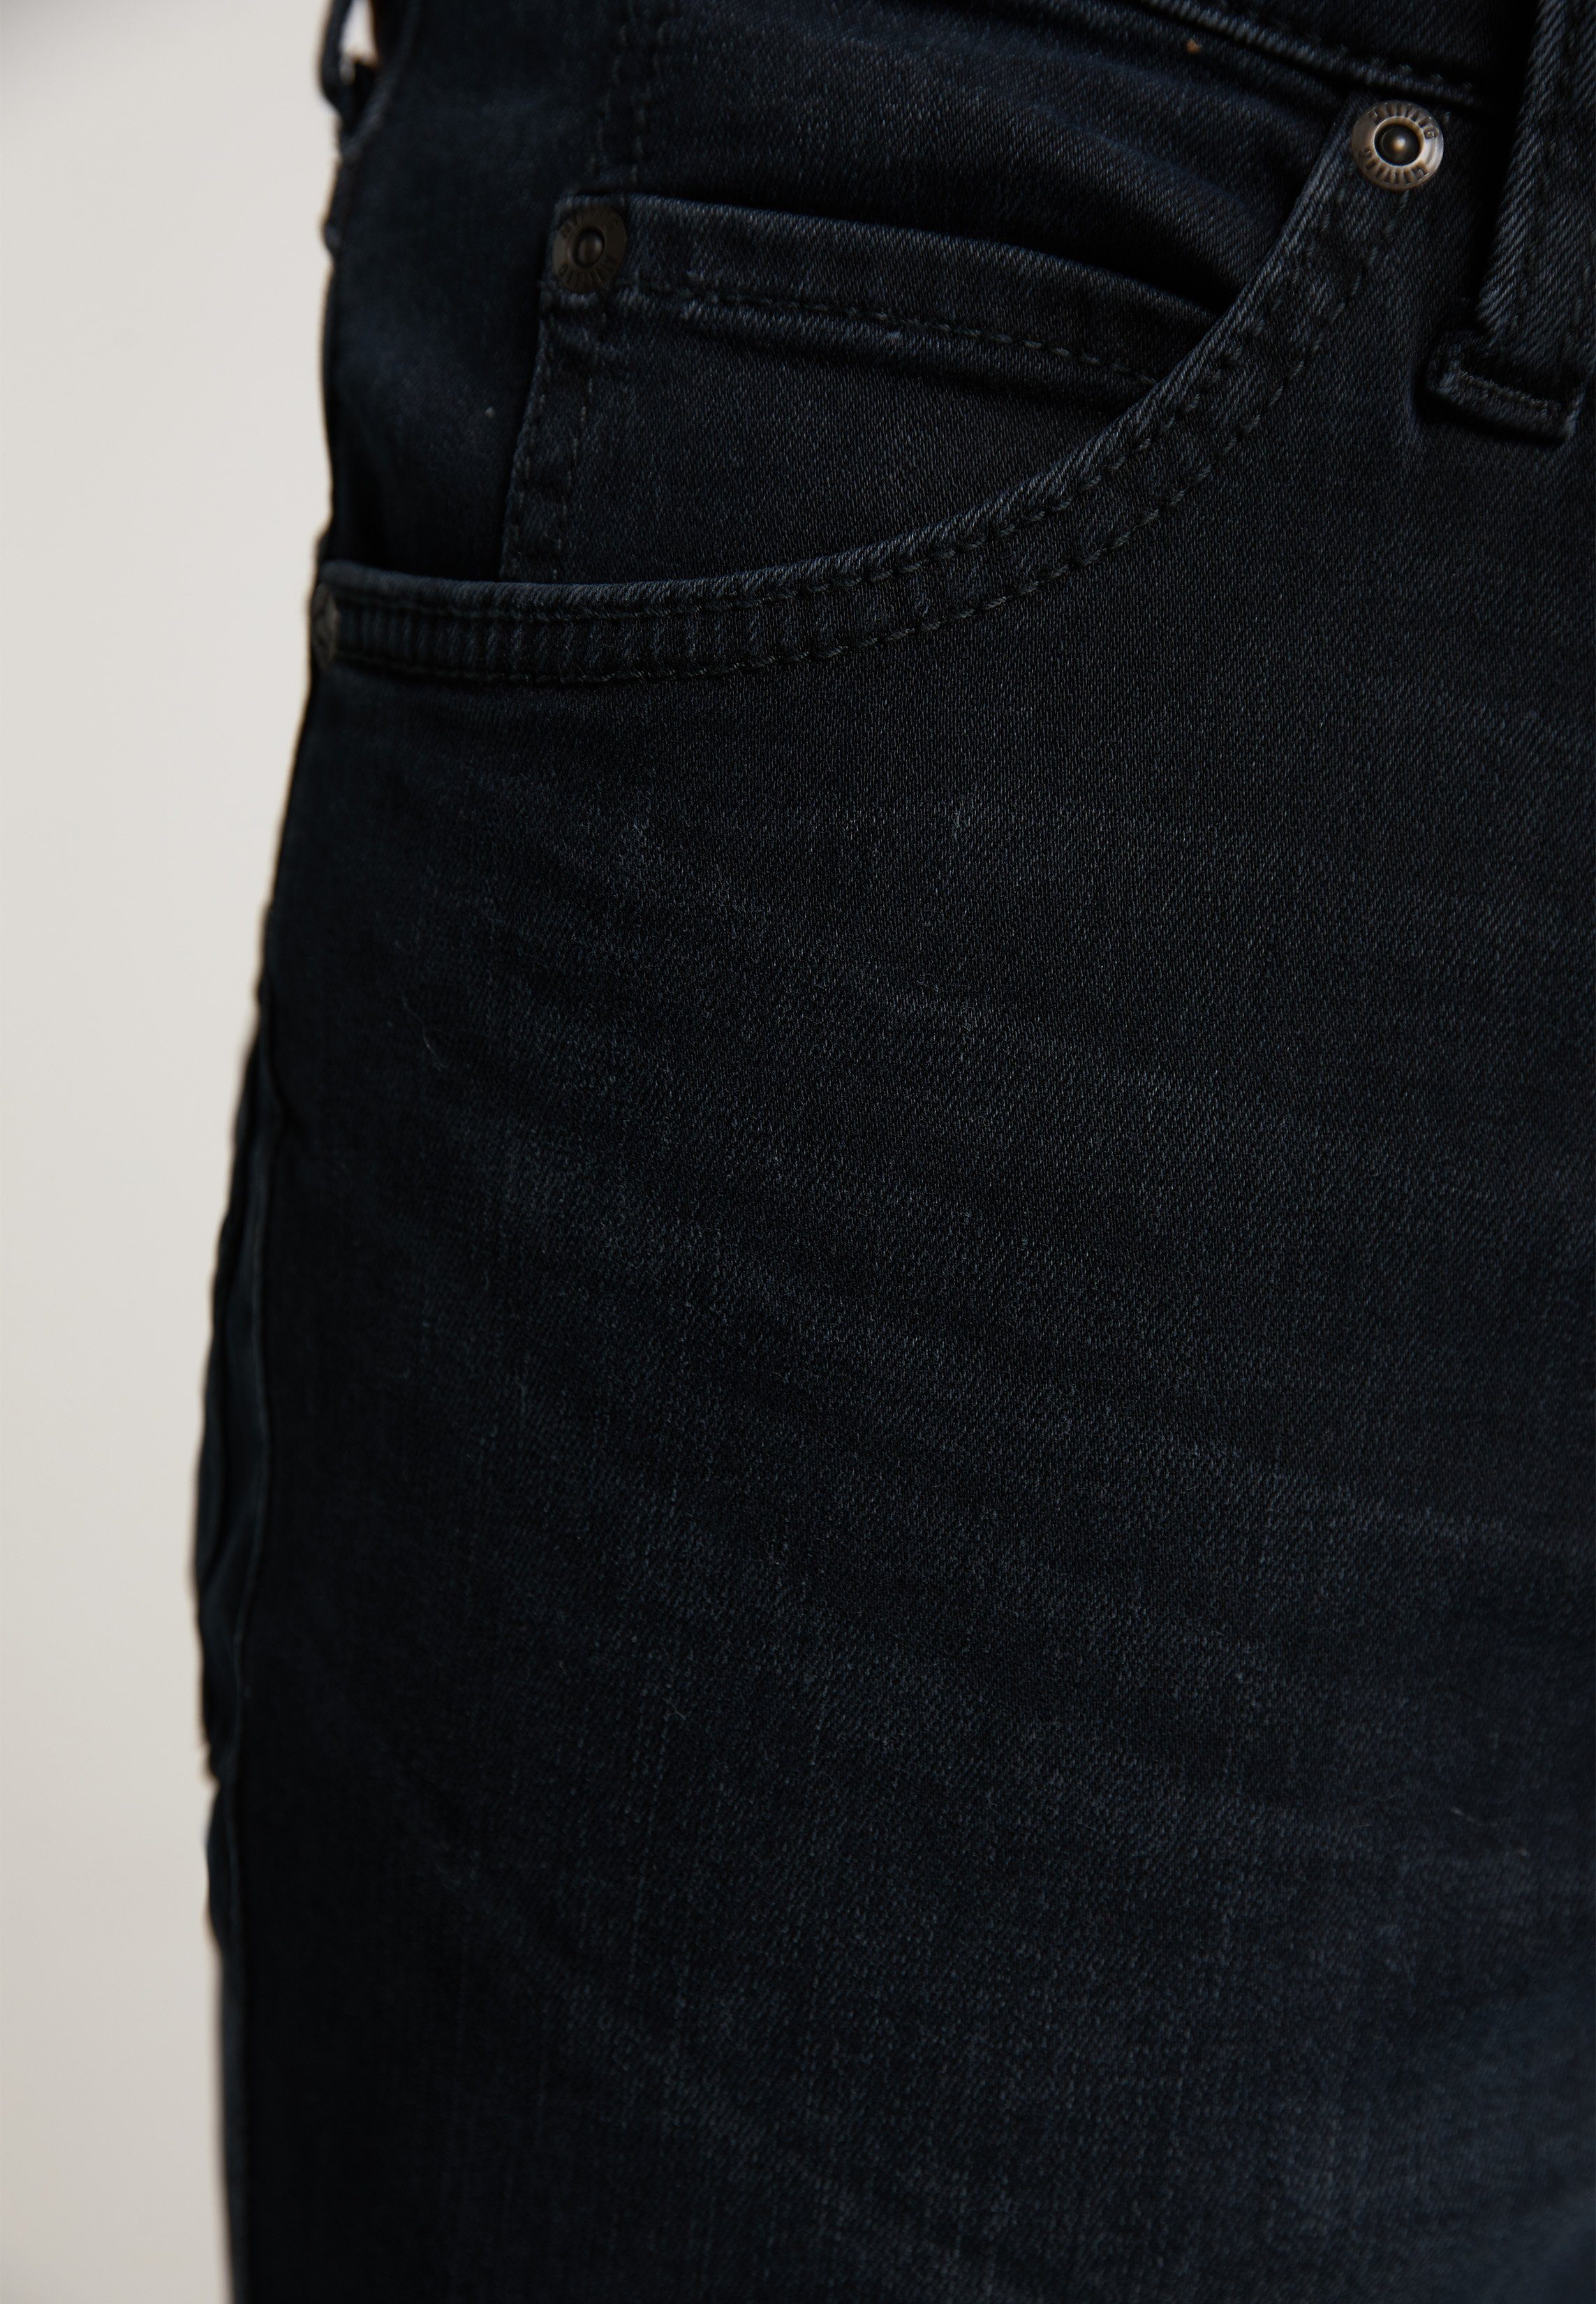 MUSTANG Tramper Tapered-fit-Jeans